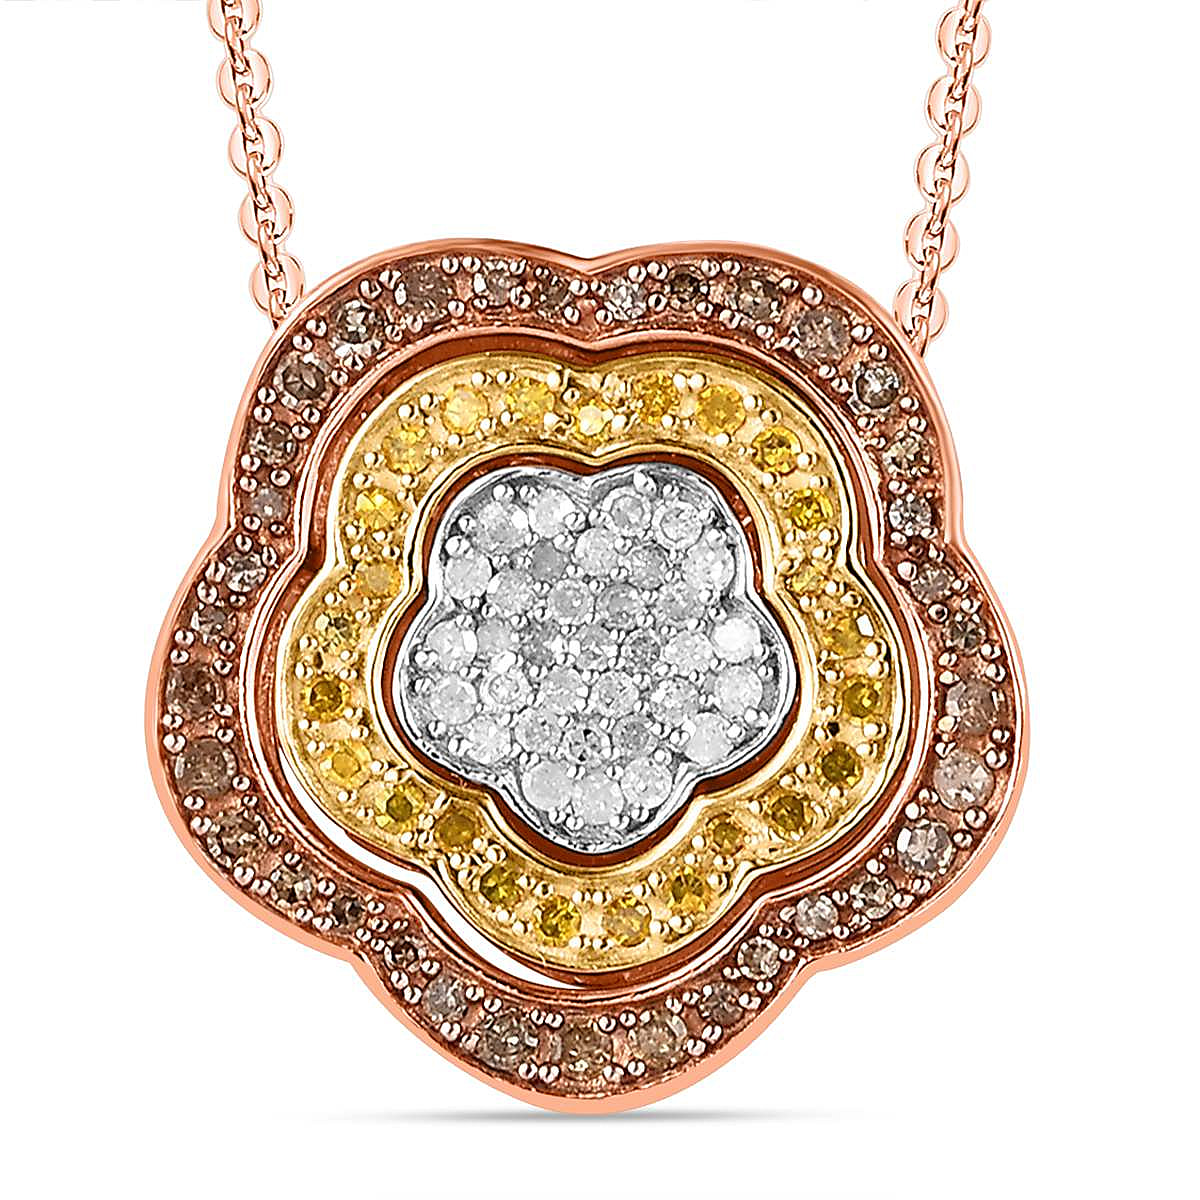 COLORS OF ARGYLE - Champagne Diamond, Yellow Diamond, White Diamond Pendant with Chain (Size 20) in Platinum, 18K Vermeil Yellow Gold, Rose Gold Plated Sterling Silver